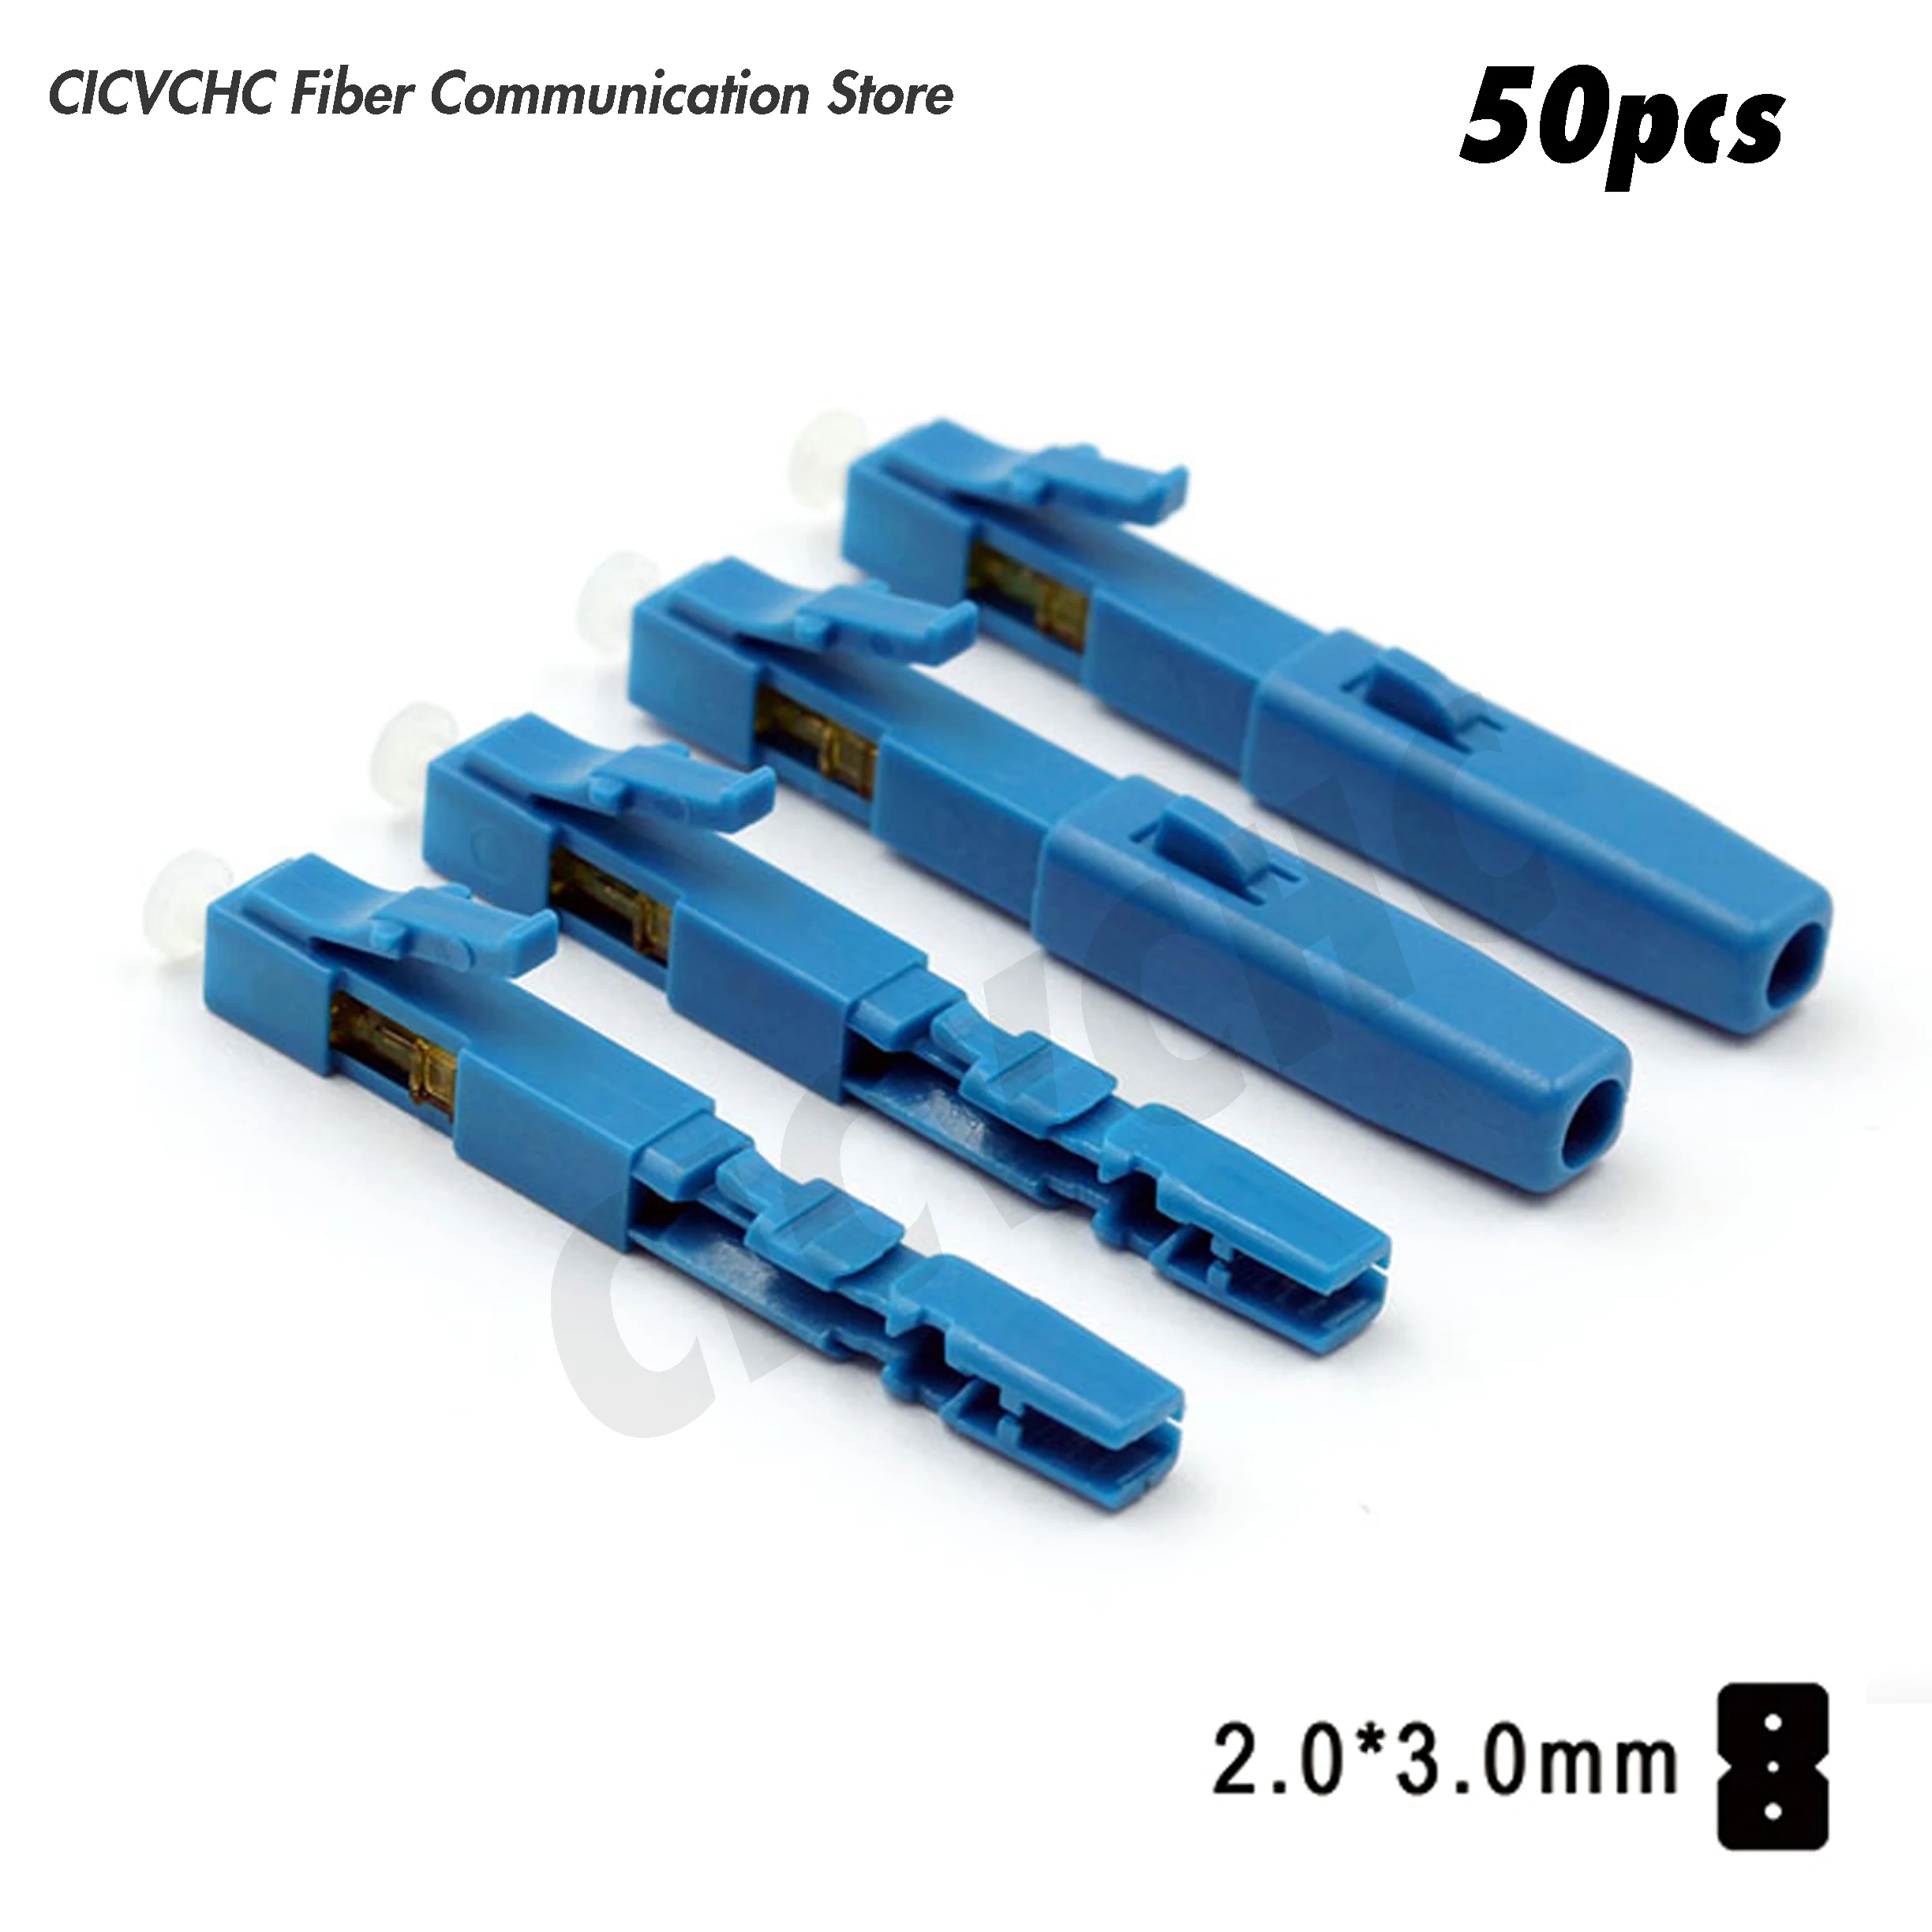 50pcs or 5pcs LC/UPC Field Installation Connector Fast Connector for 2.0x3.0mm Drop Cable